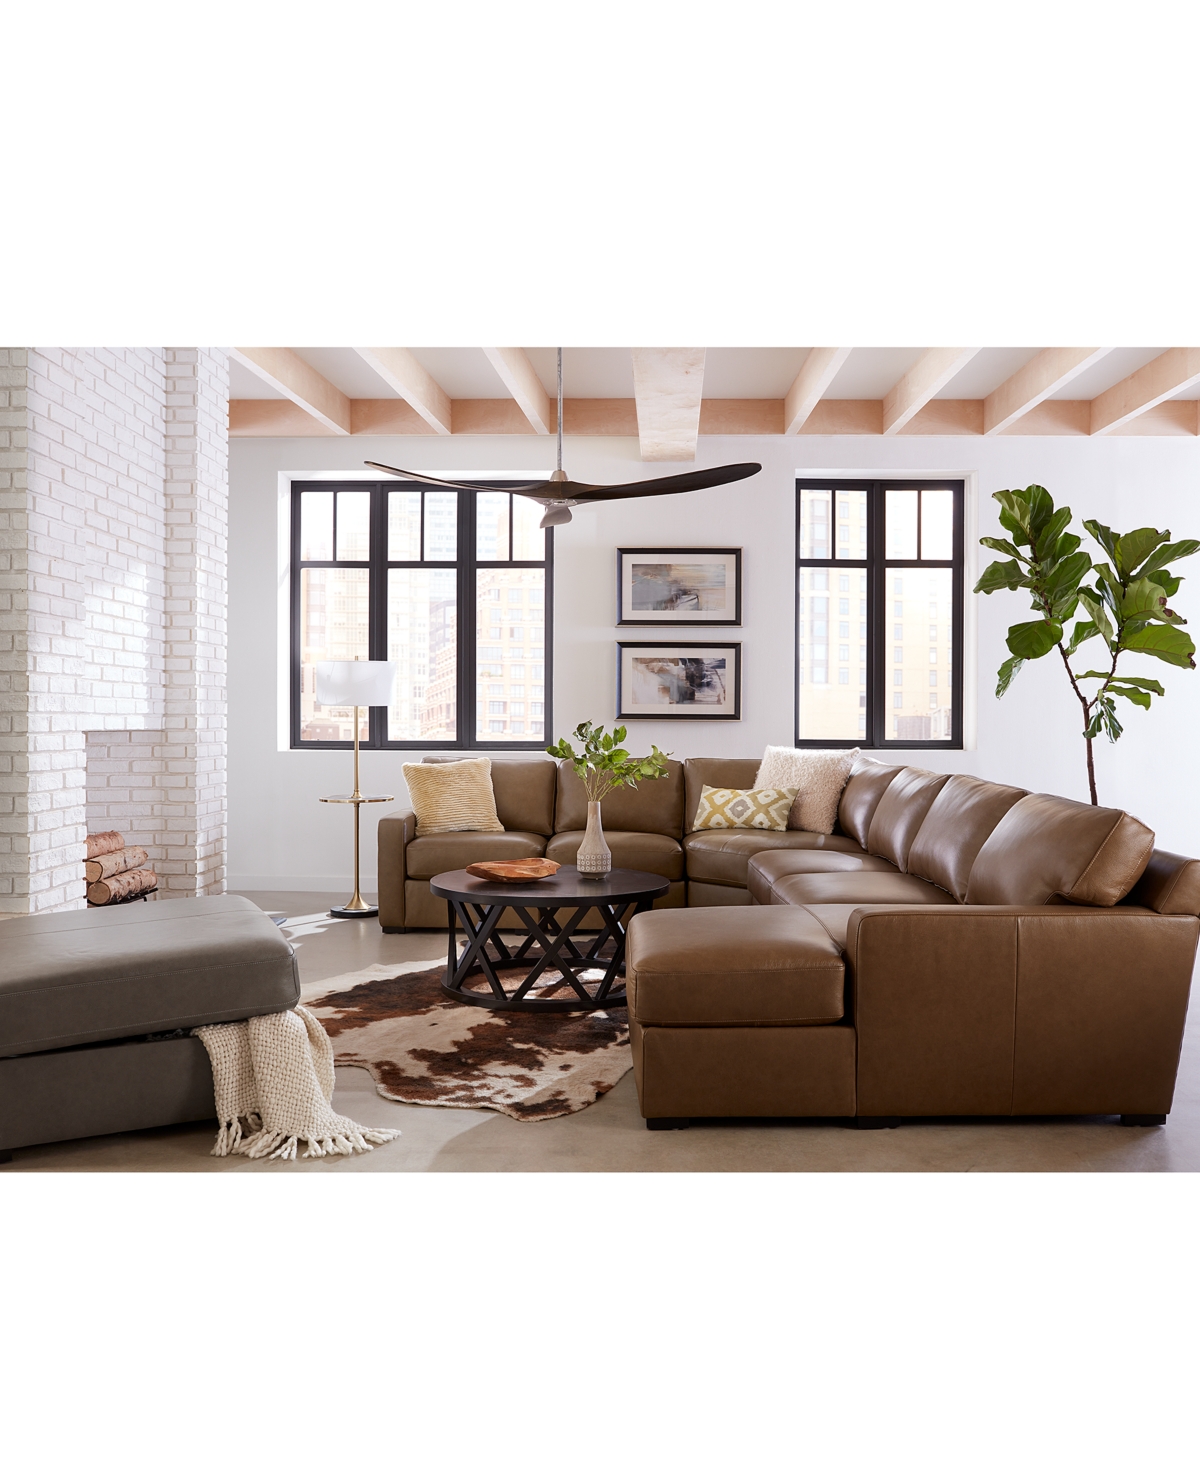 Shop Macy's Radley 129" 6-pc. Leather Square Corner Modular Chaise Sectional, Created For  In Anthracite